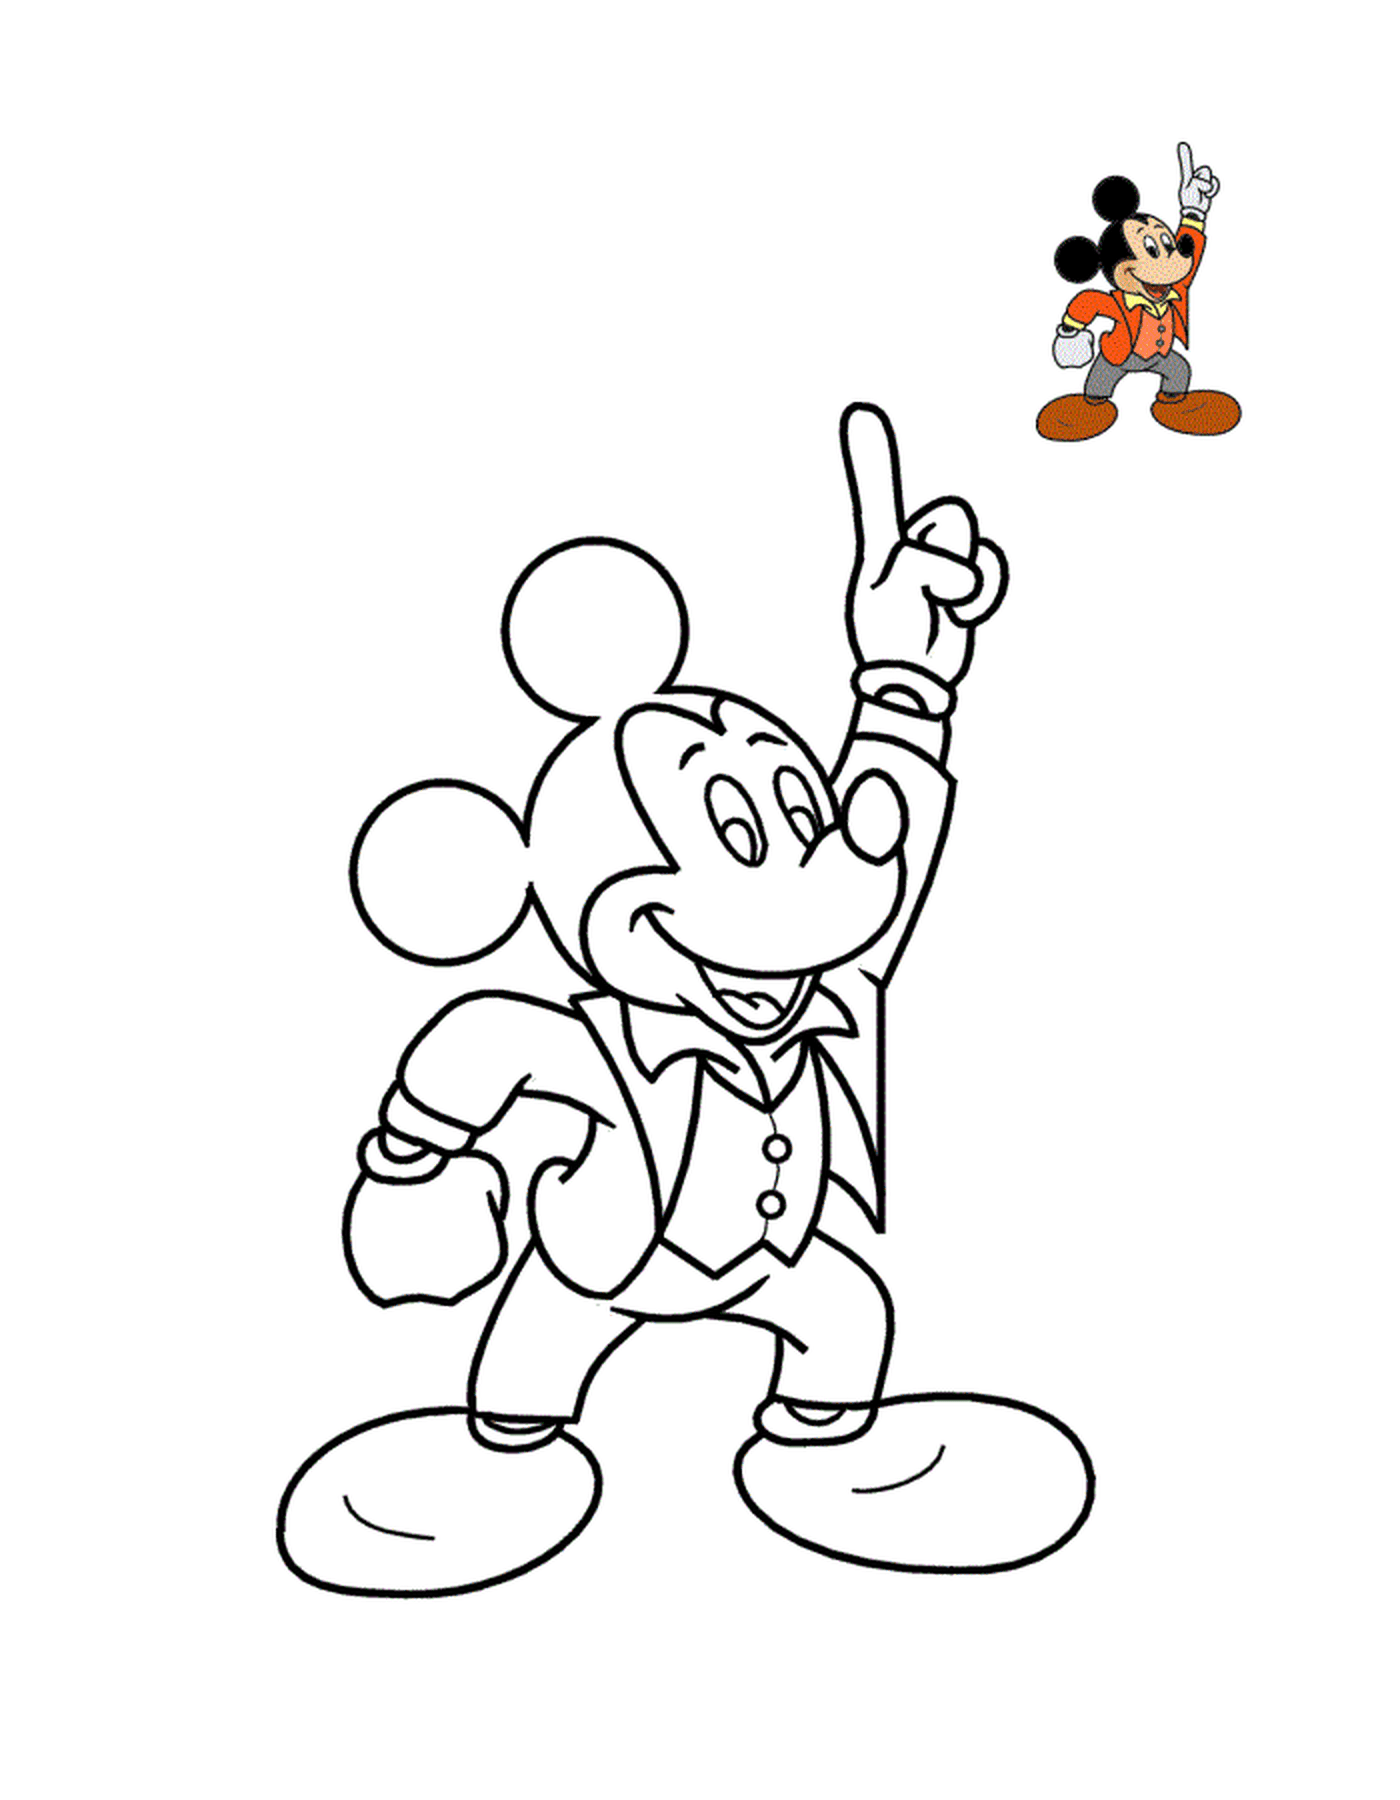  Mickey Mouse, a star of the comic show 